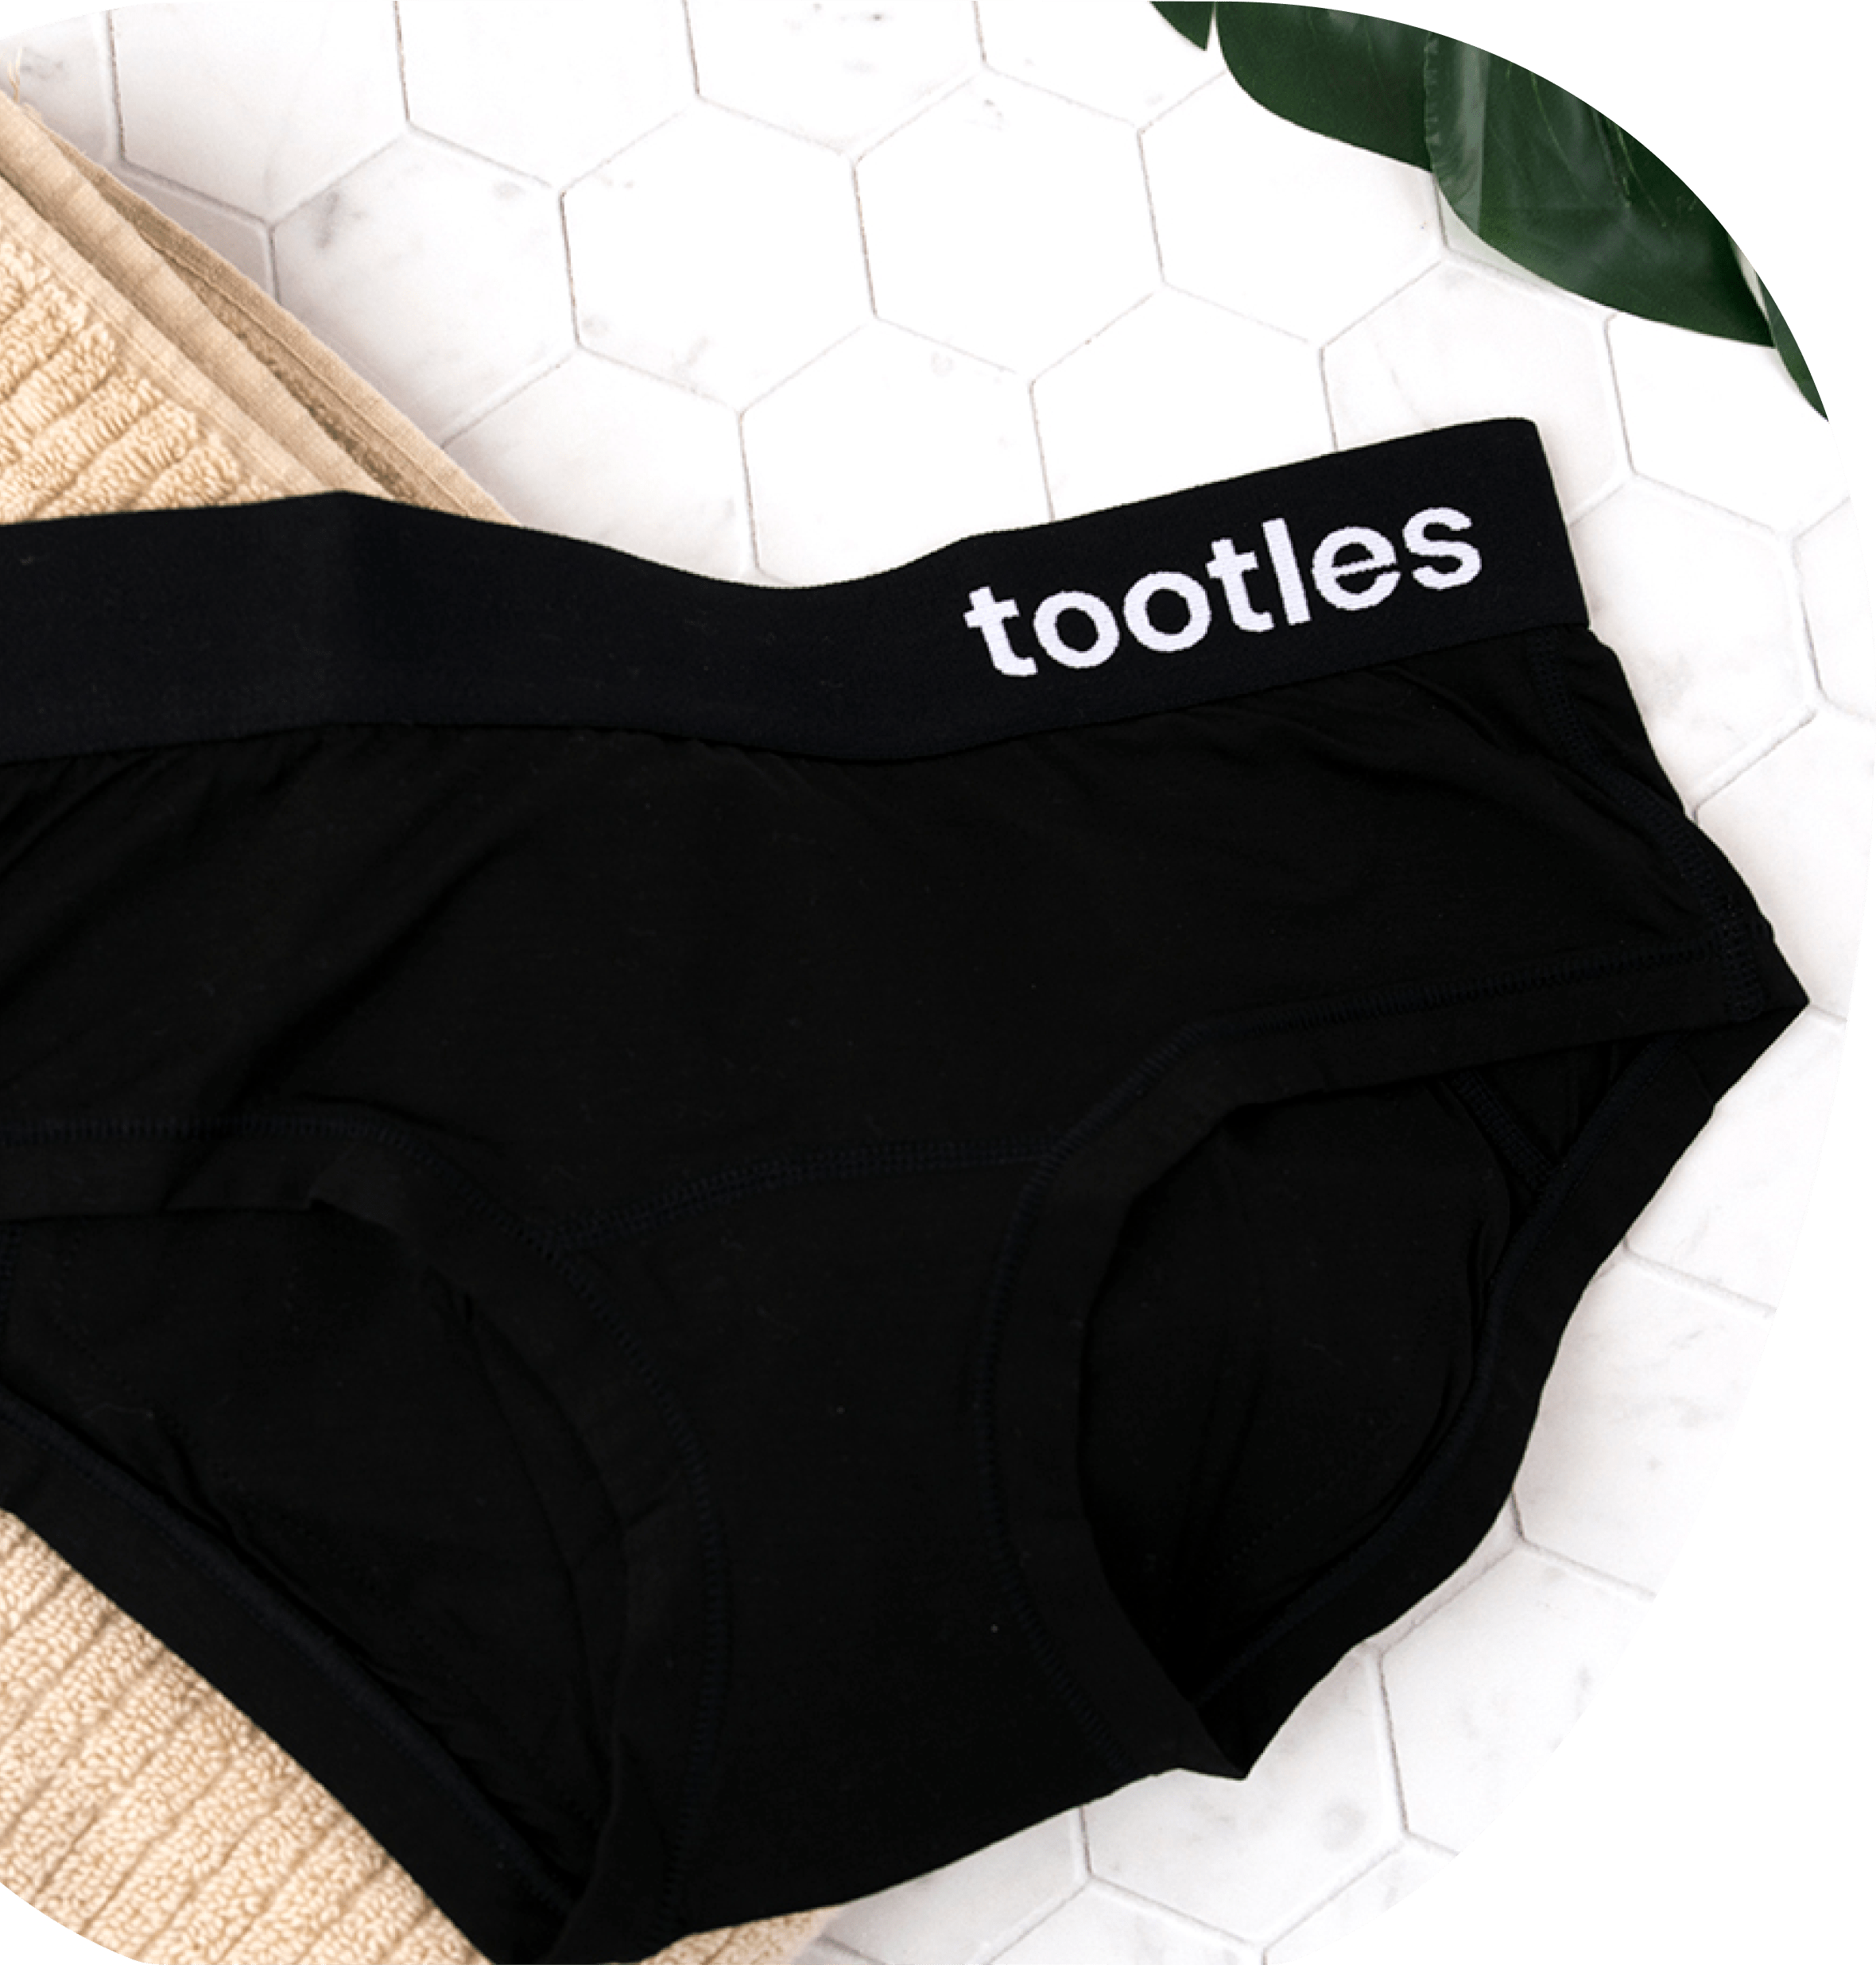 Tootles - Wait fart filtering underwear? Is that such a thing